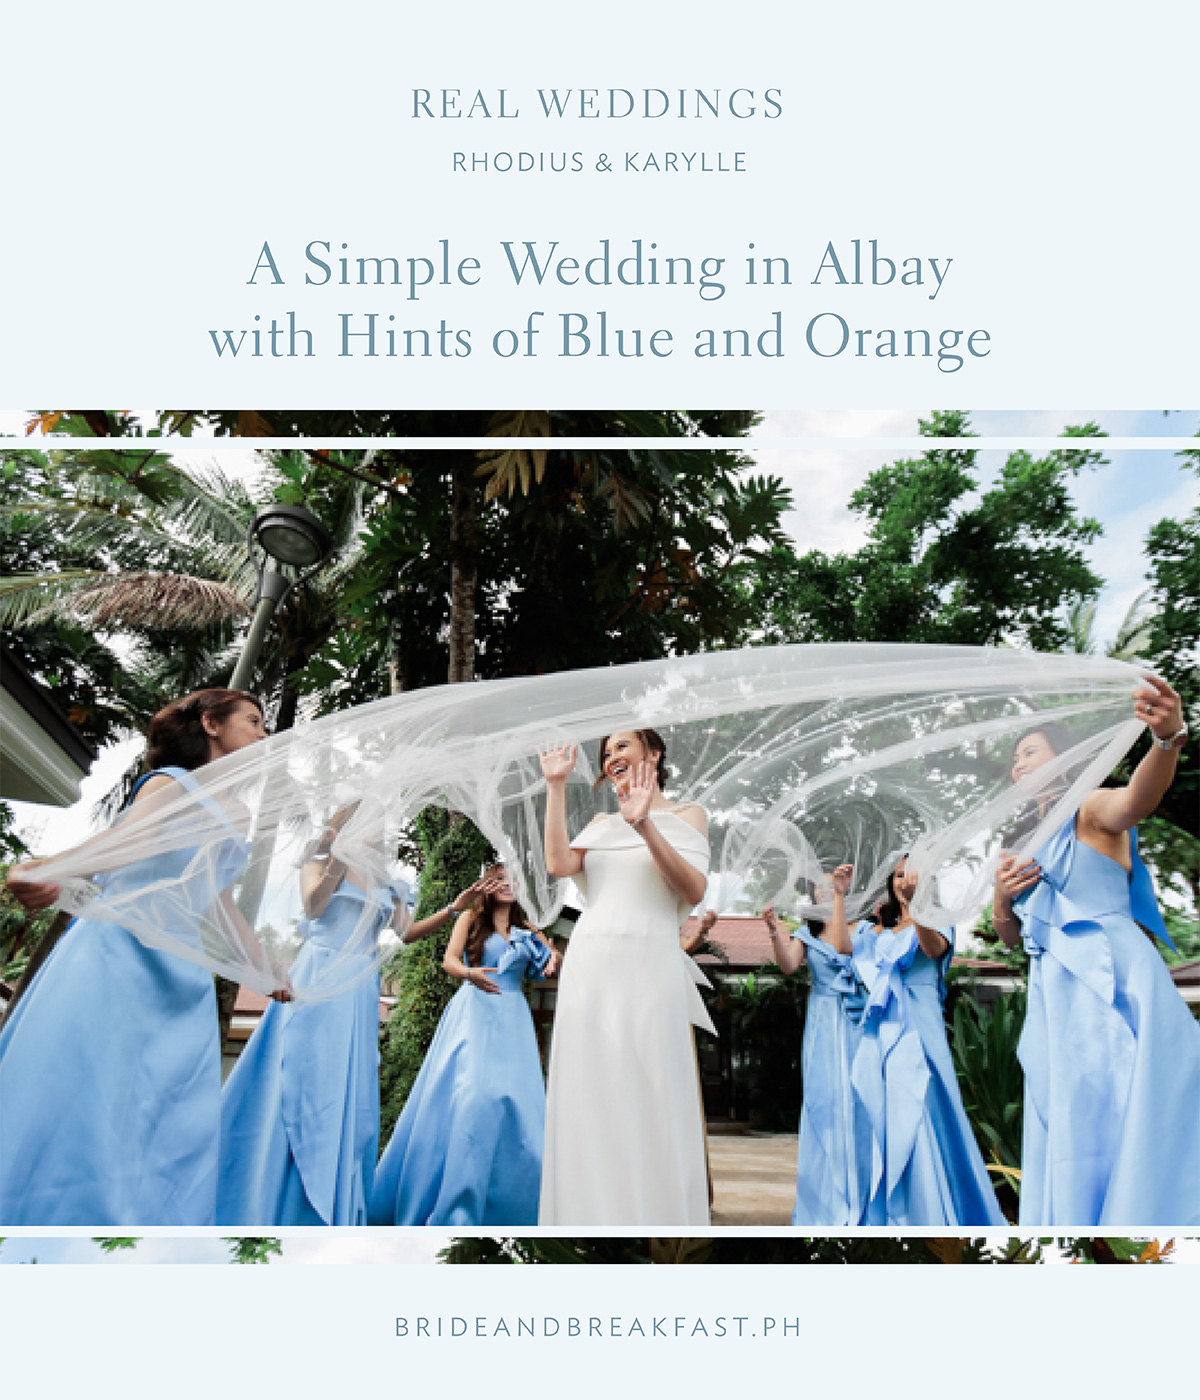 Bride and Breakfast: Real Weddings A Simple Wedding in Albay with Hints of Blue and Orange